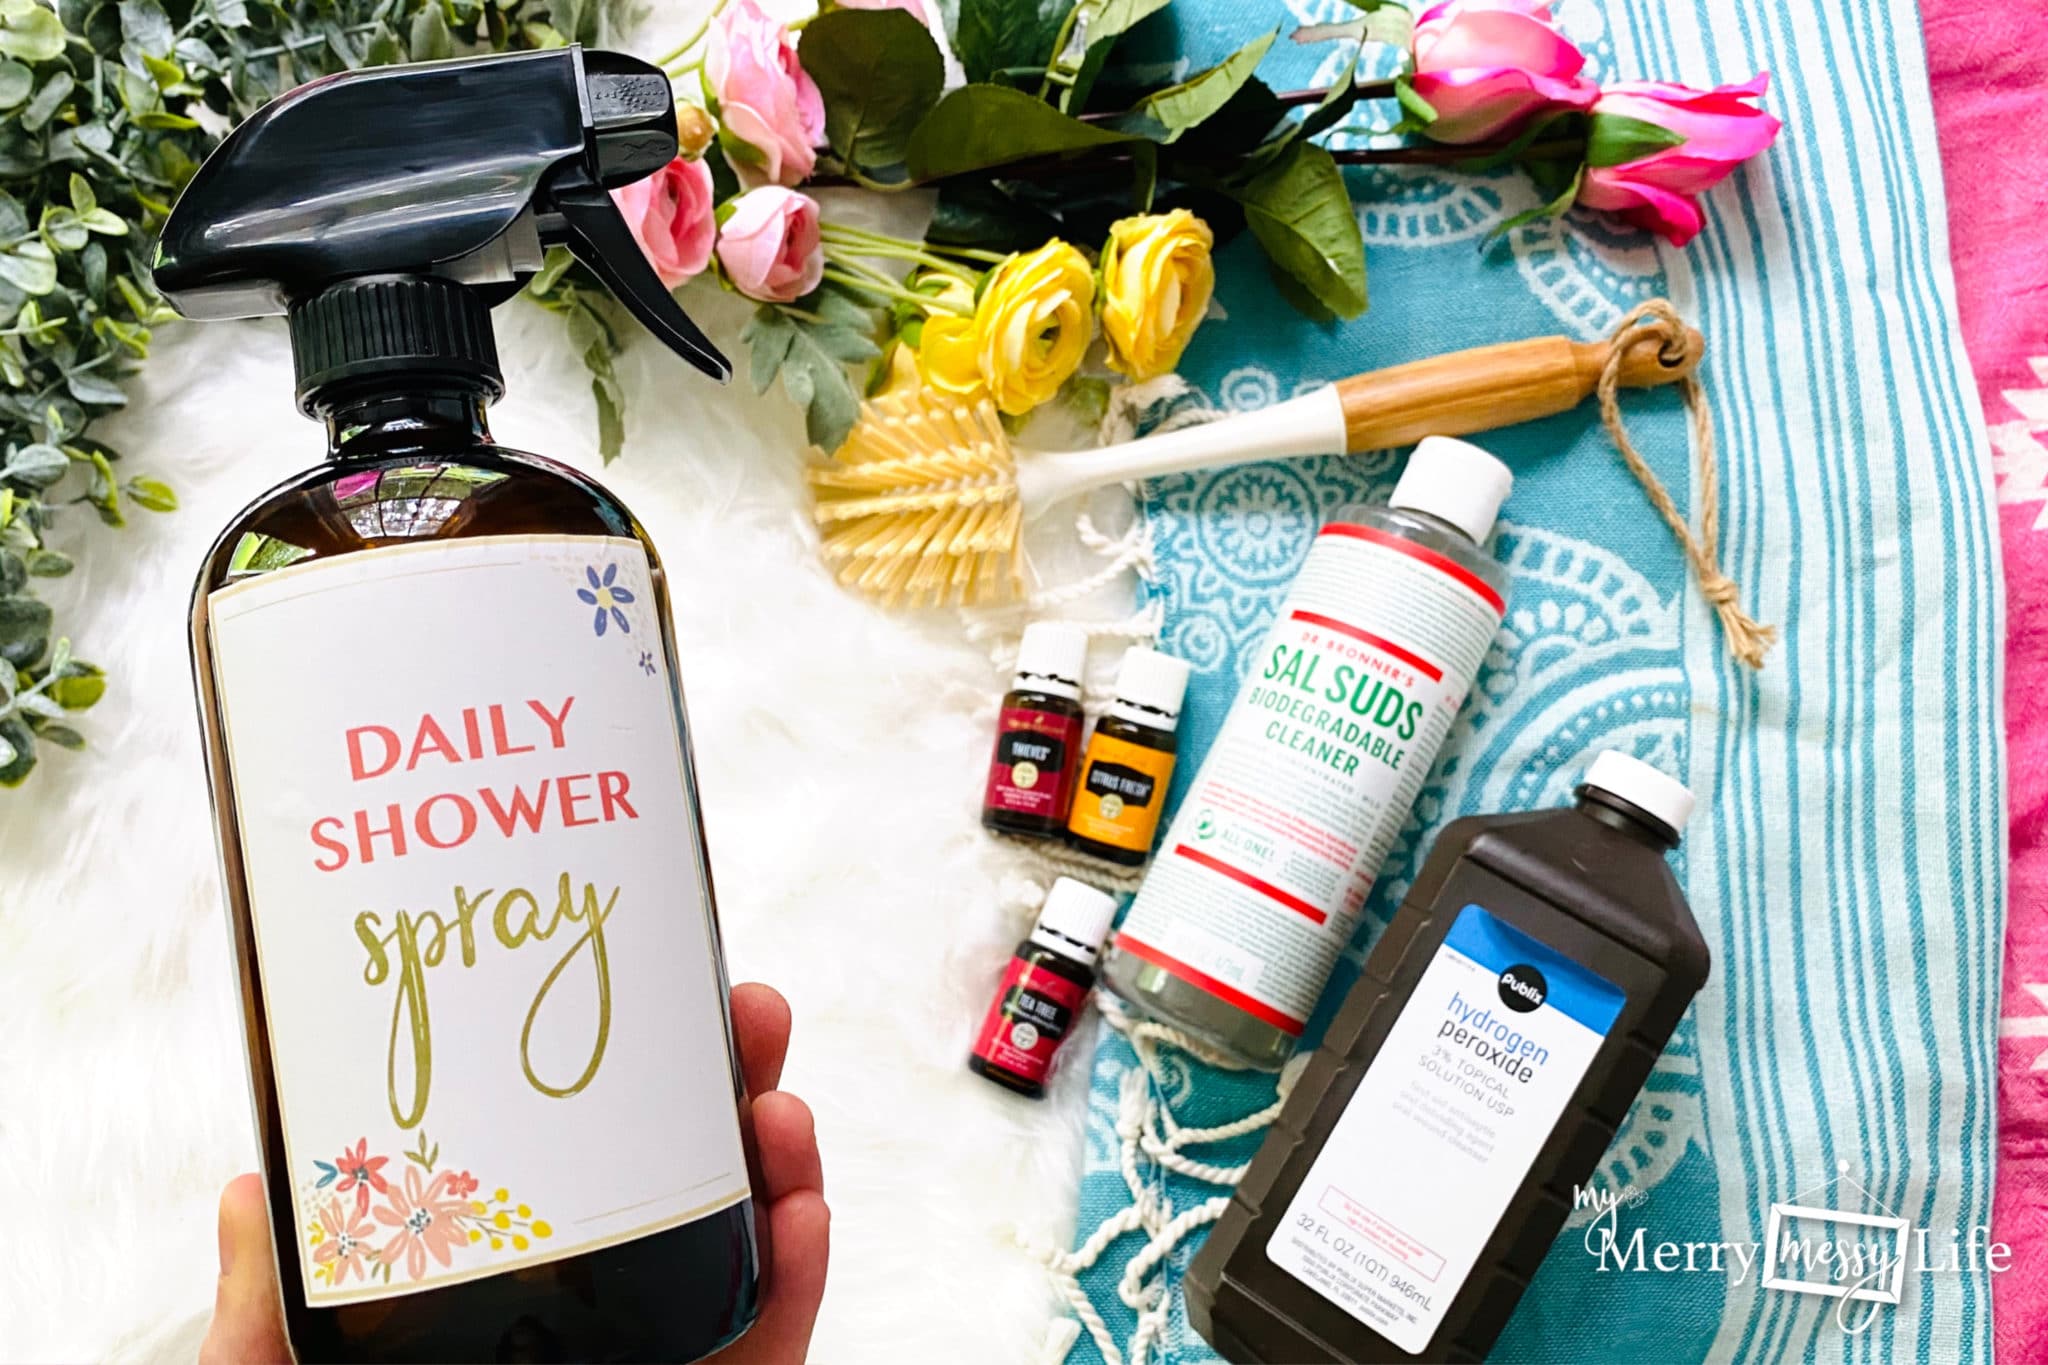 DIY Natural Daily Shower Spray using Hydrogen Peroxide, Sal Suds, and essential oils to keep your shower clean and prevent soap scum